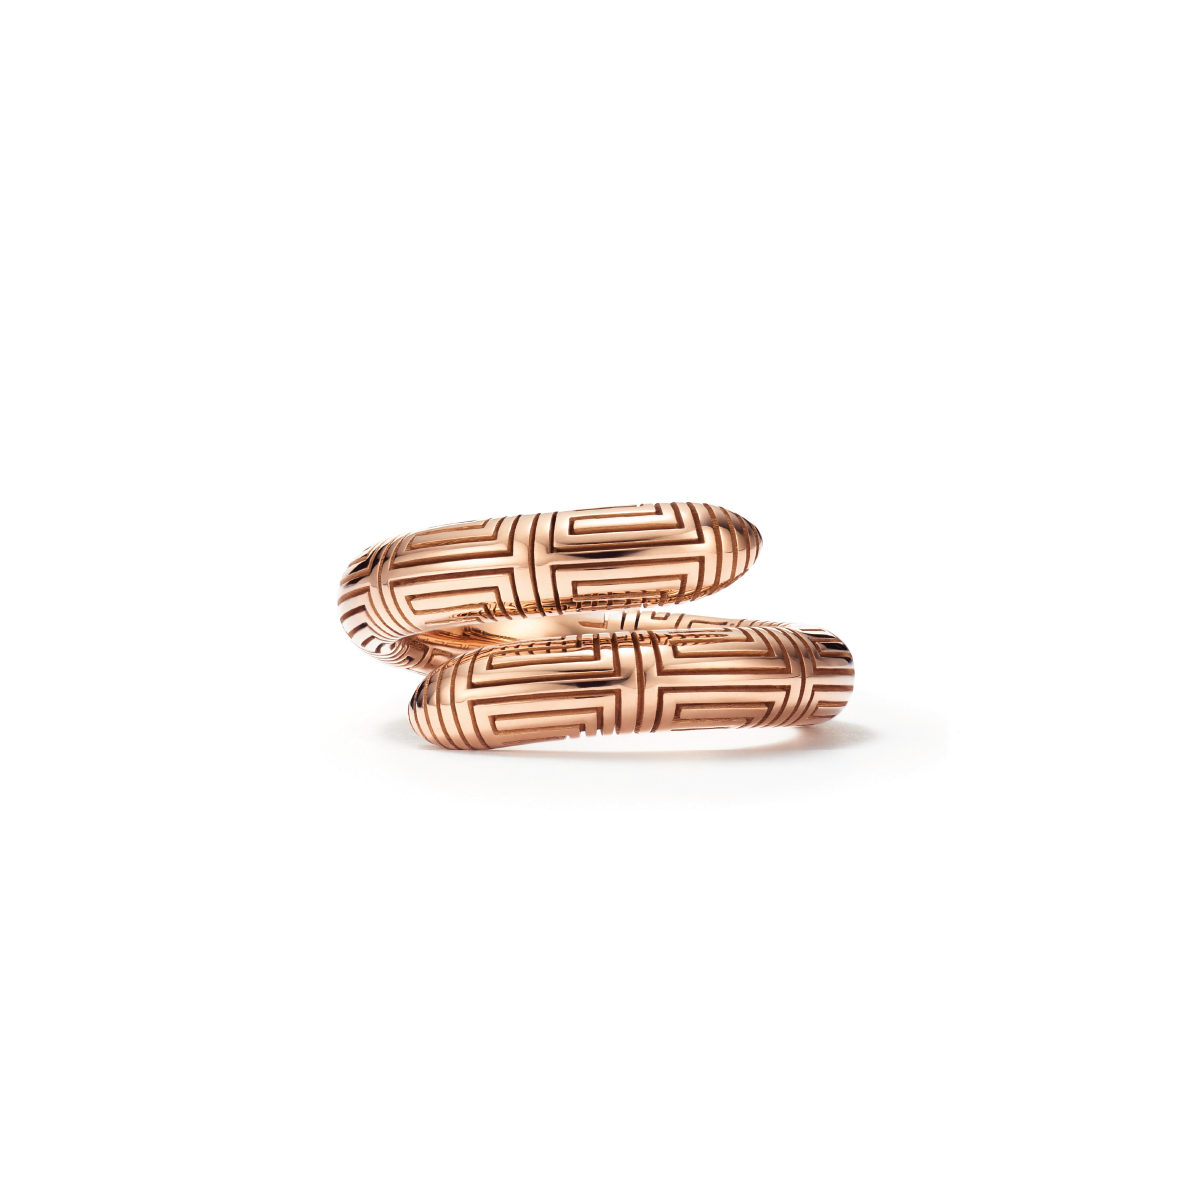 Ethical Rose Gold Ring for Man or Woman - 800 BC Ring by FUTURA Jewelry